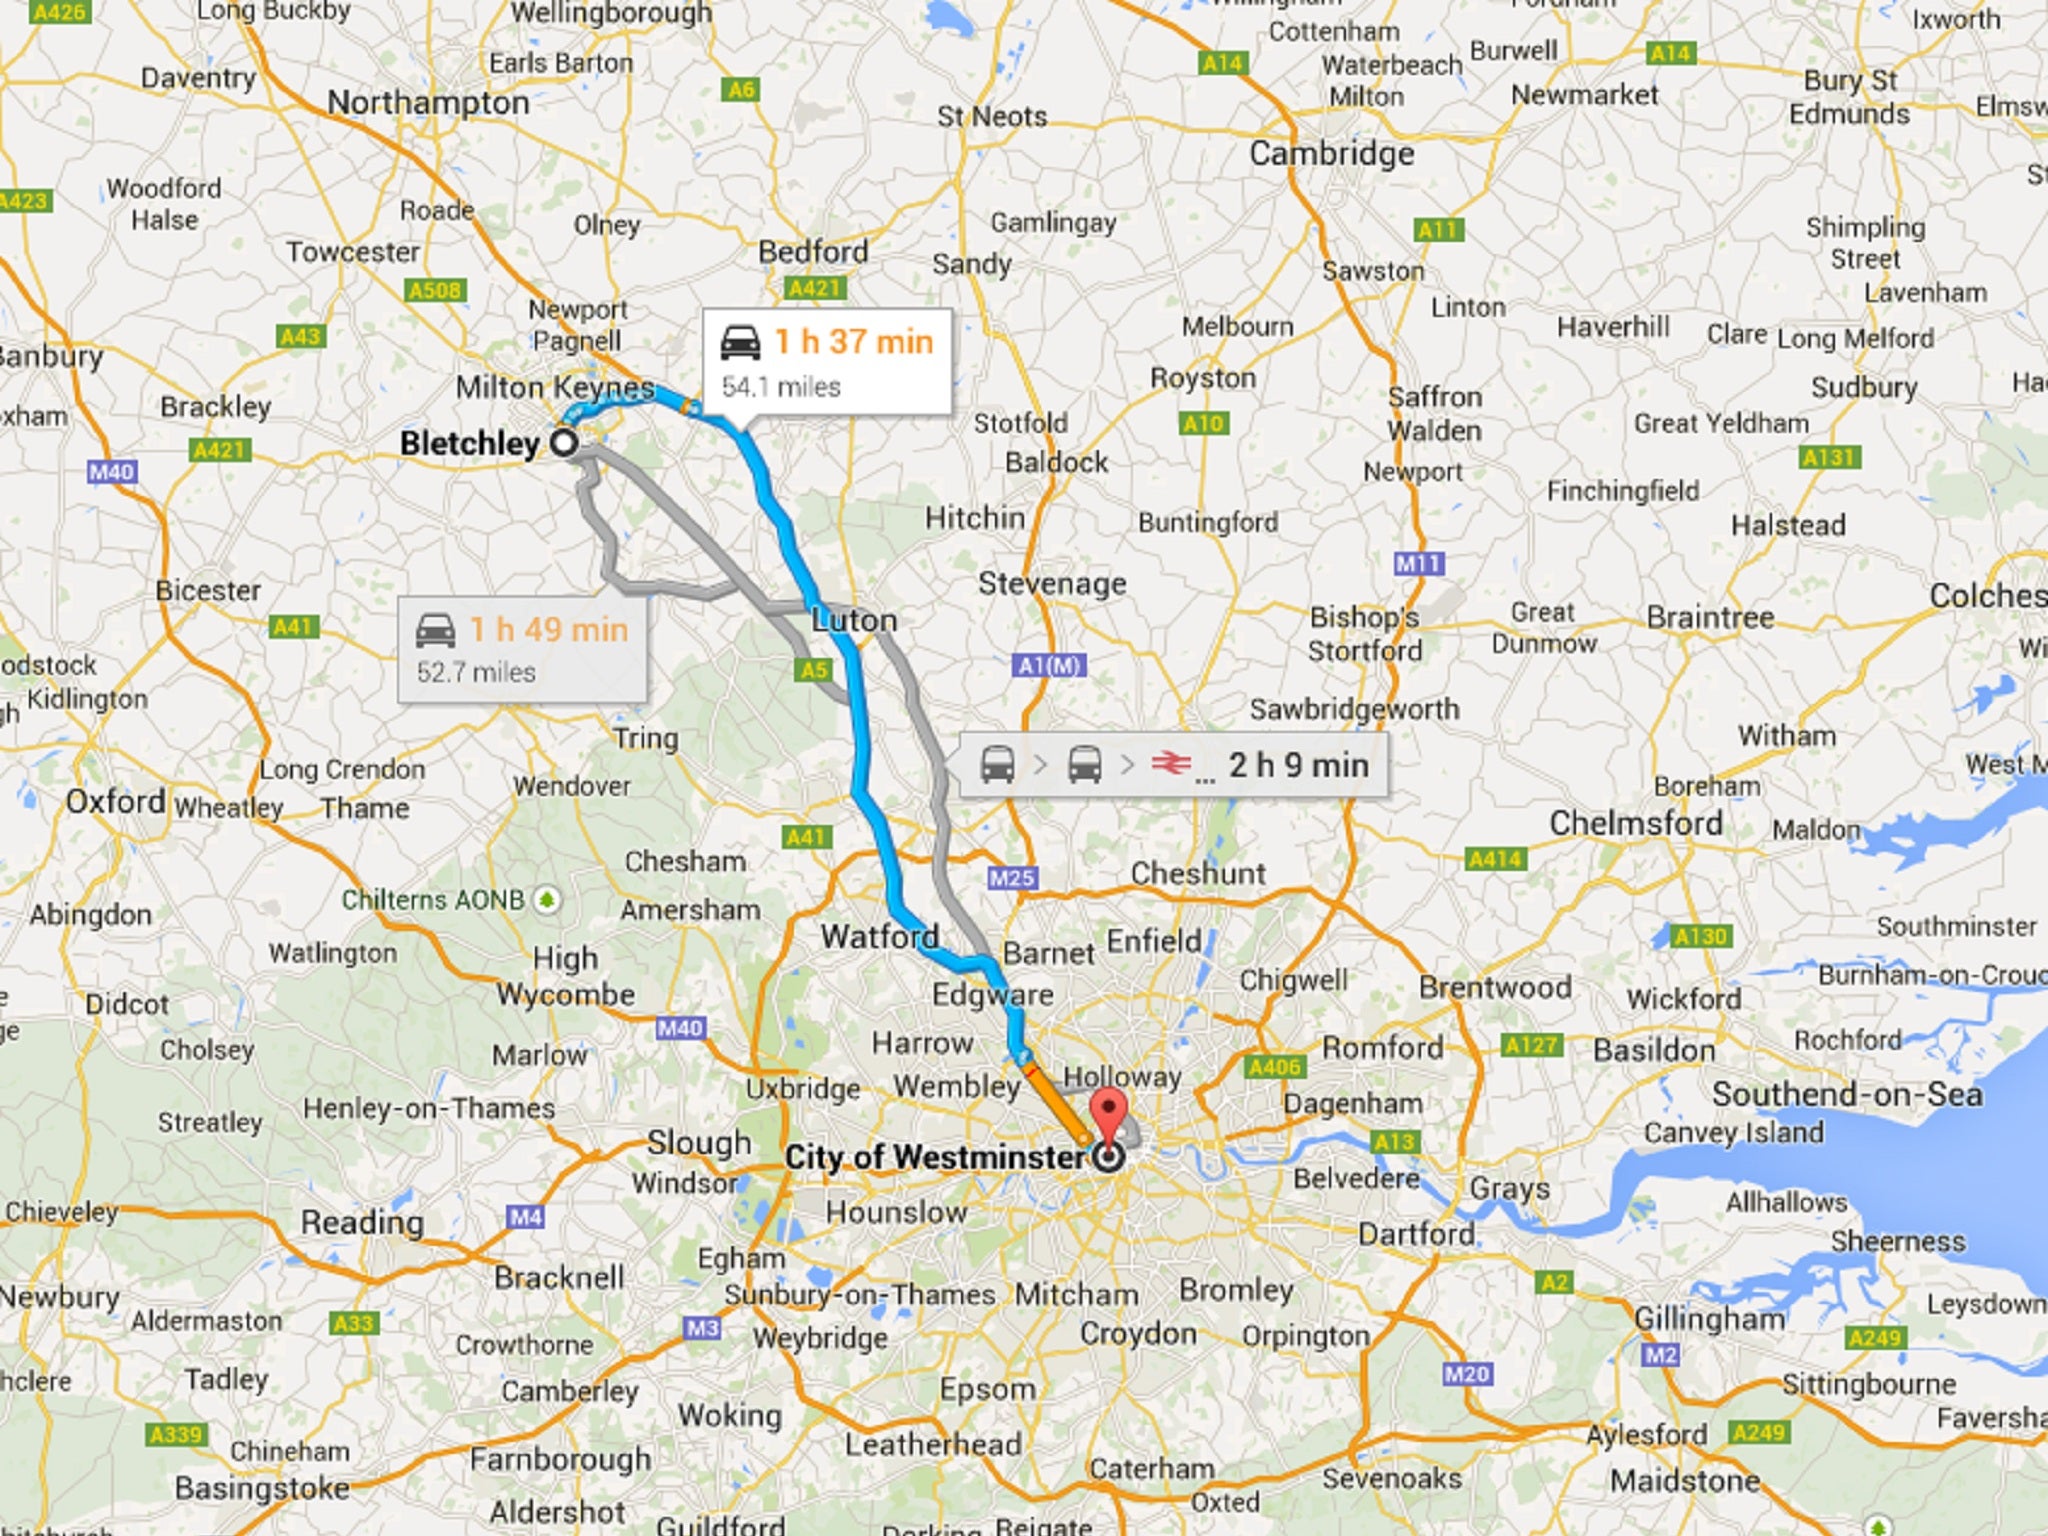 Bletchley in Milton Keynes is nearly 55 miles away from Westminster